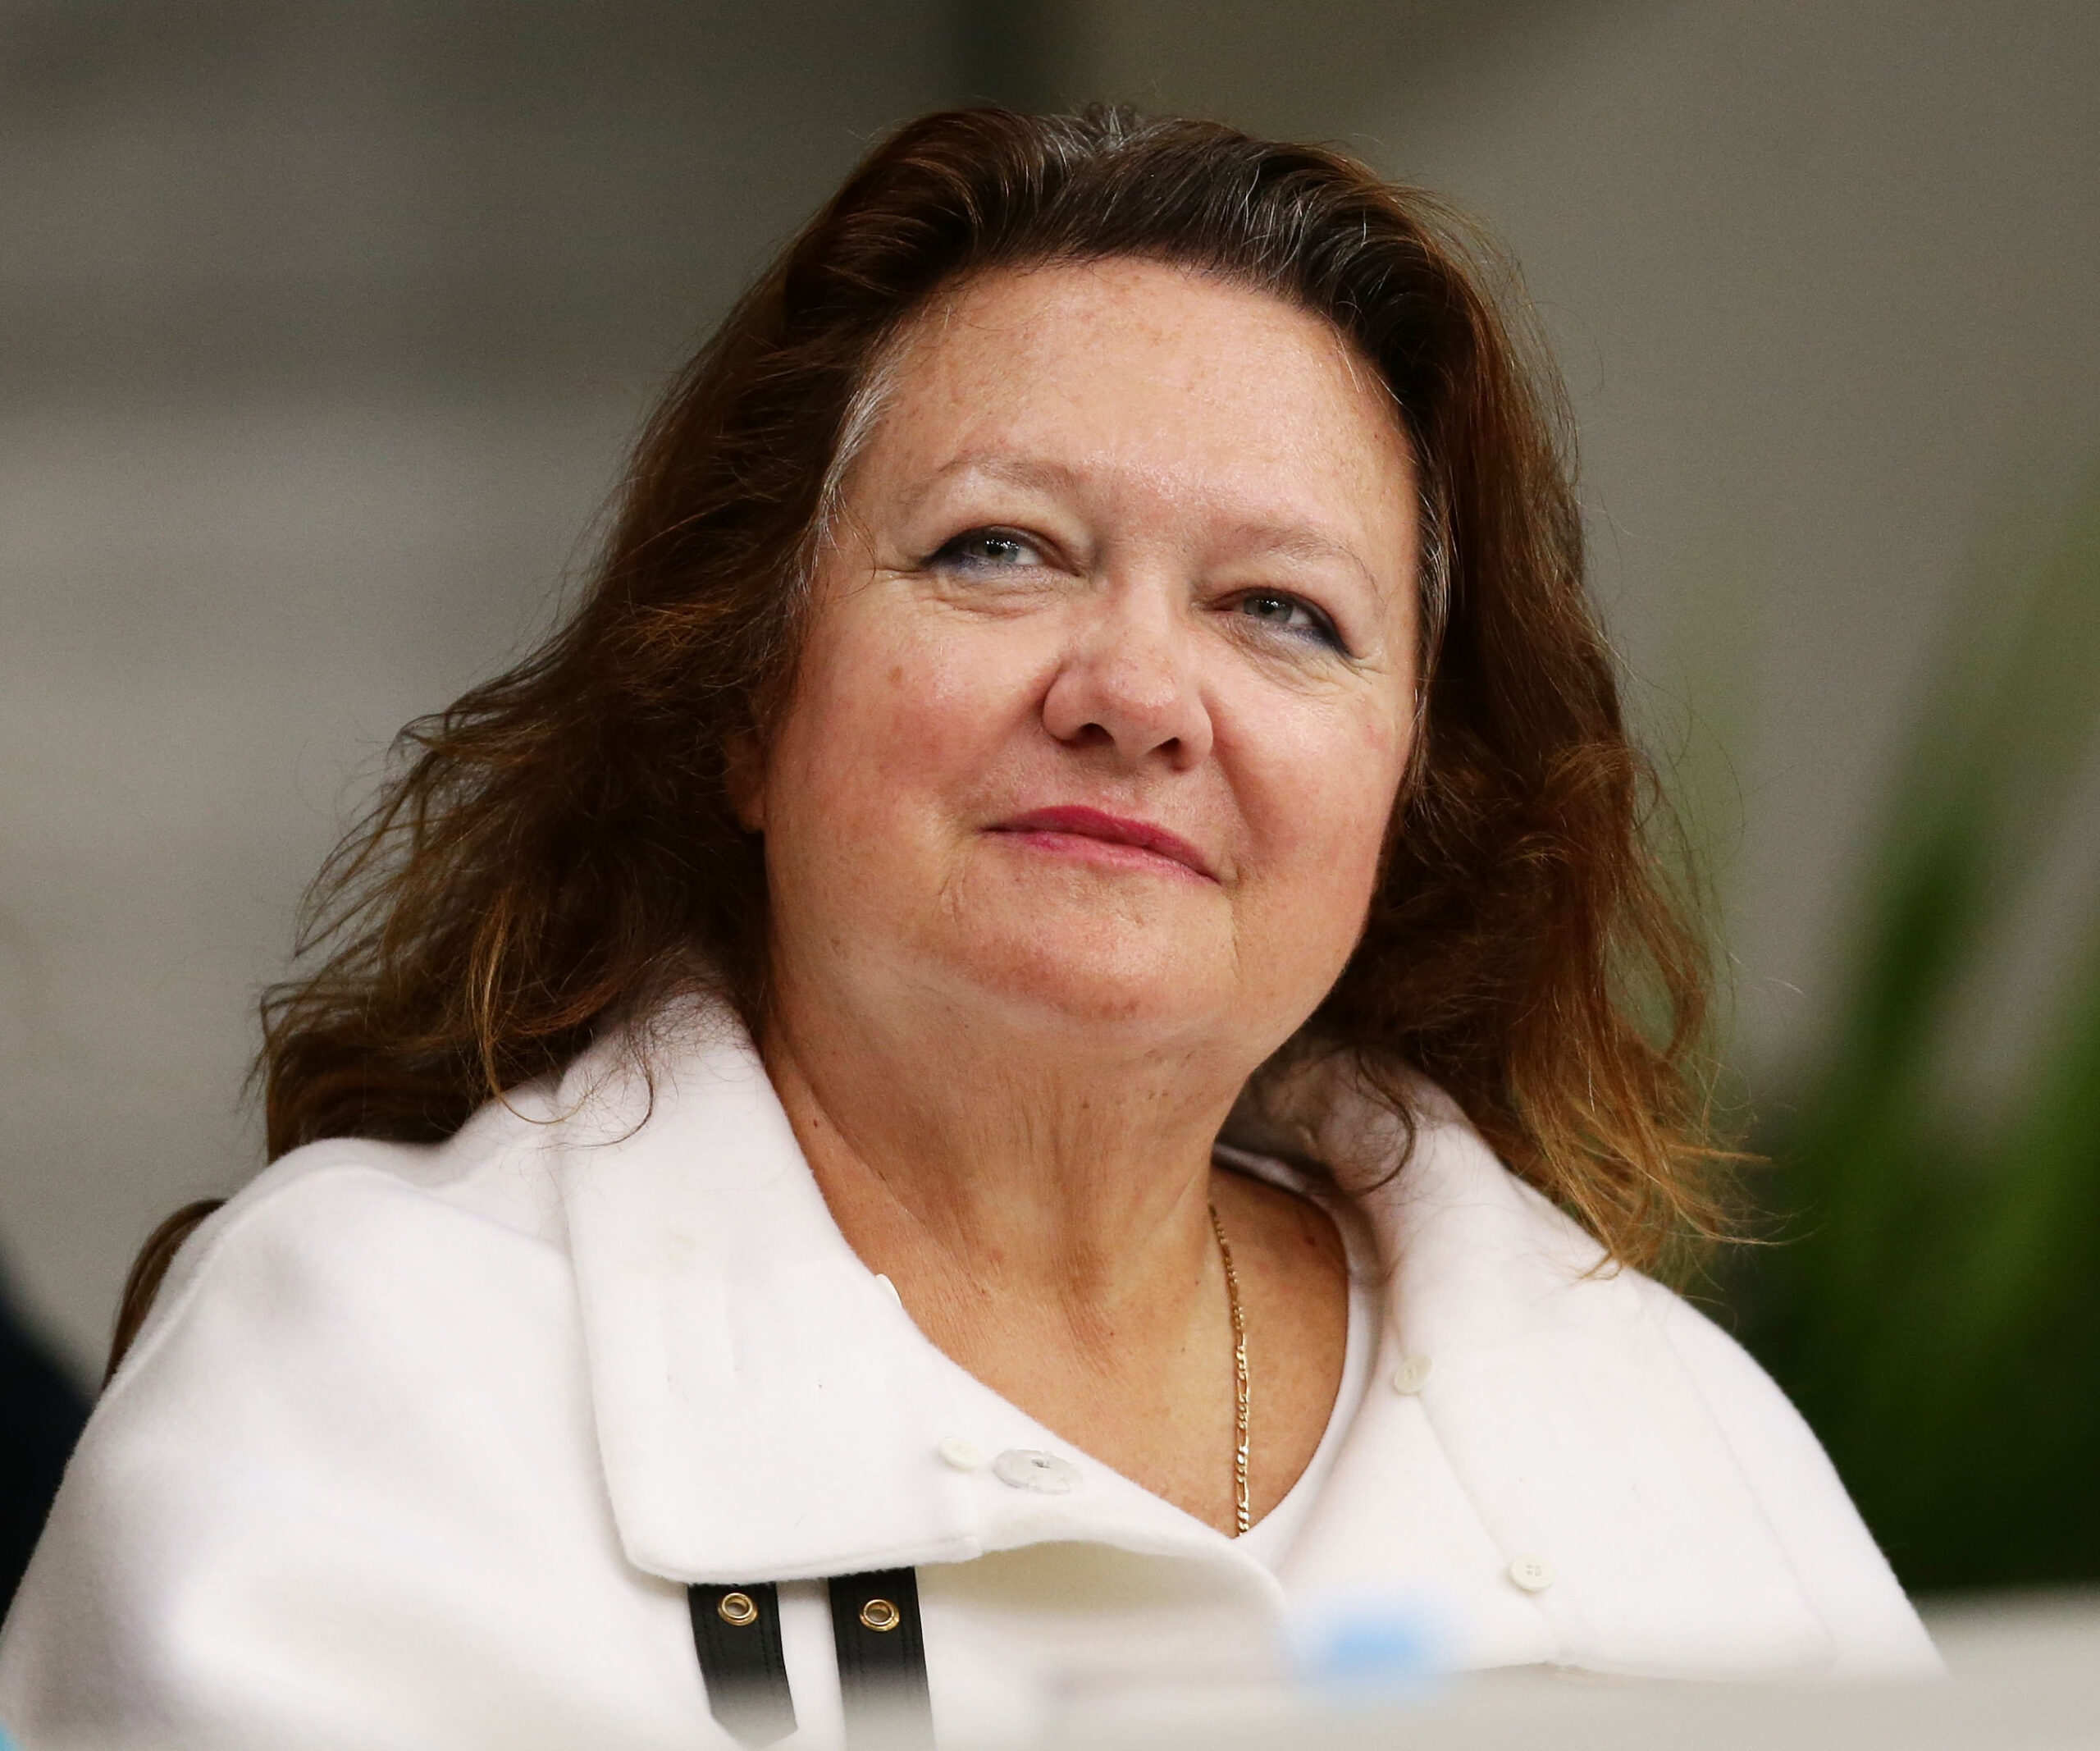 An Australian named one of the world’s most powerful women